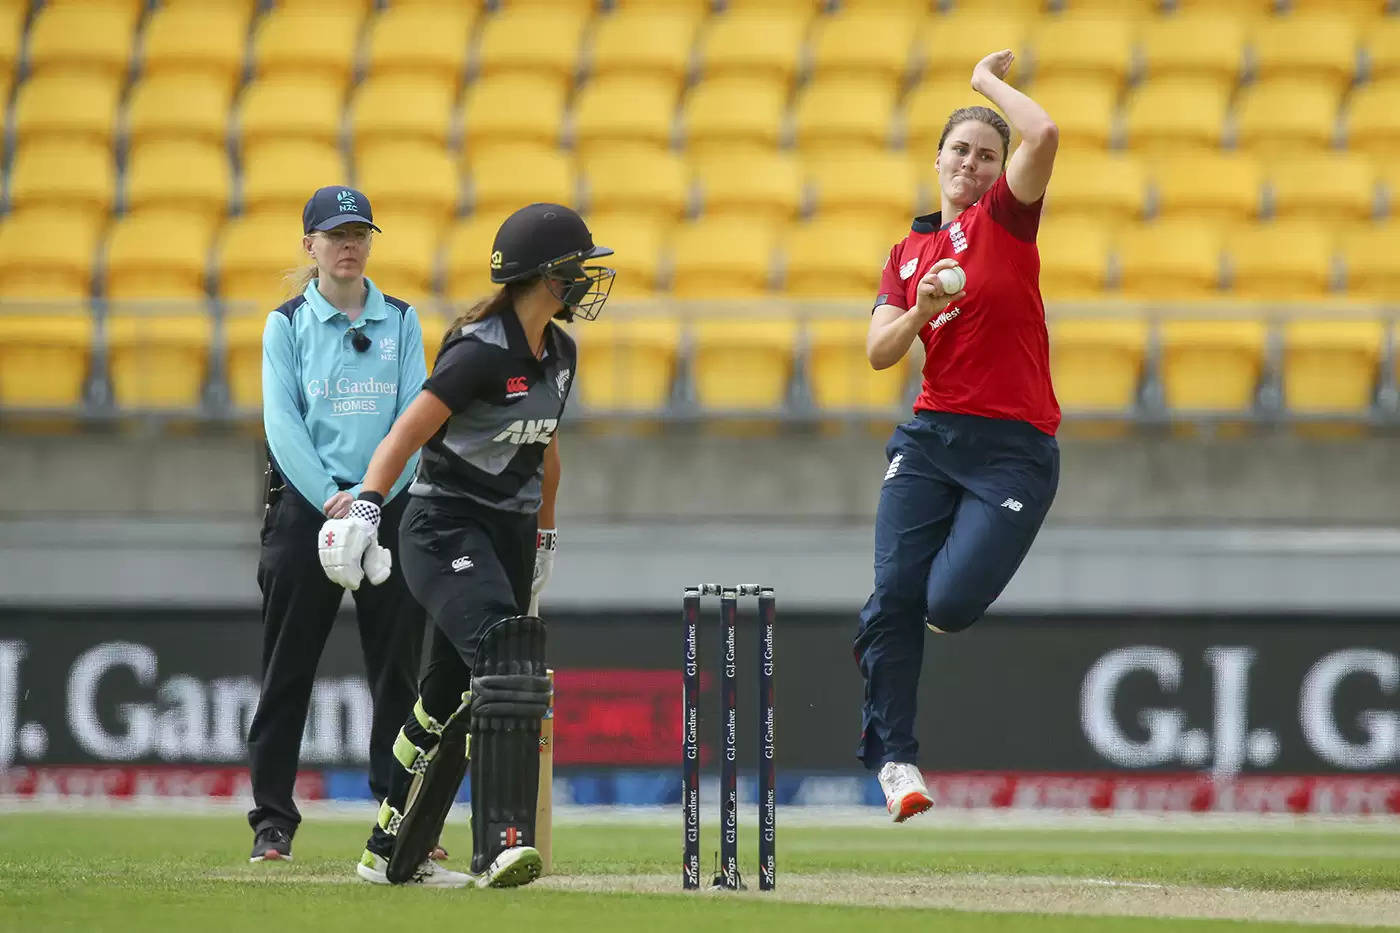 Rachael Heyhoe Flint Trophy, 2021 | Match 1: NOD vs CES Dream11 Prediction, Fantasy Cricket Tips, Team, Playing 11, Pitch Report, Weather Conditions and Injury Update for Northern Diamonds vs Central Sparks